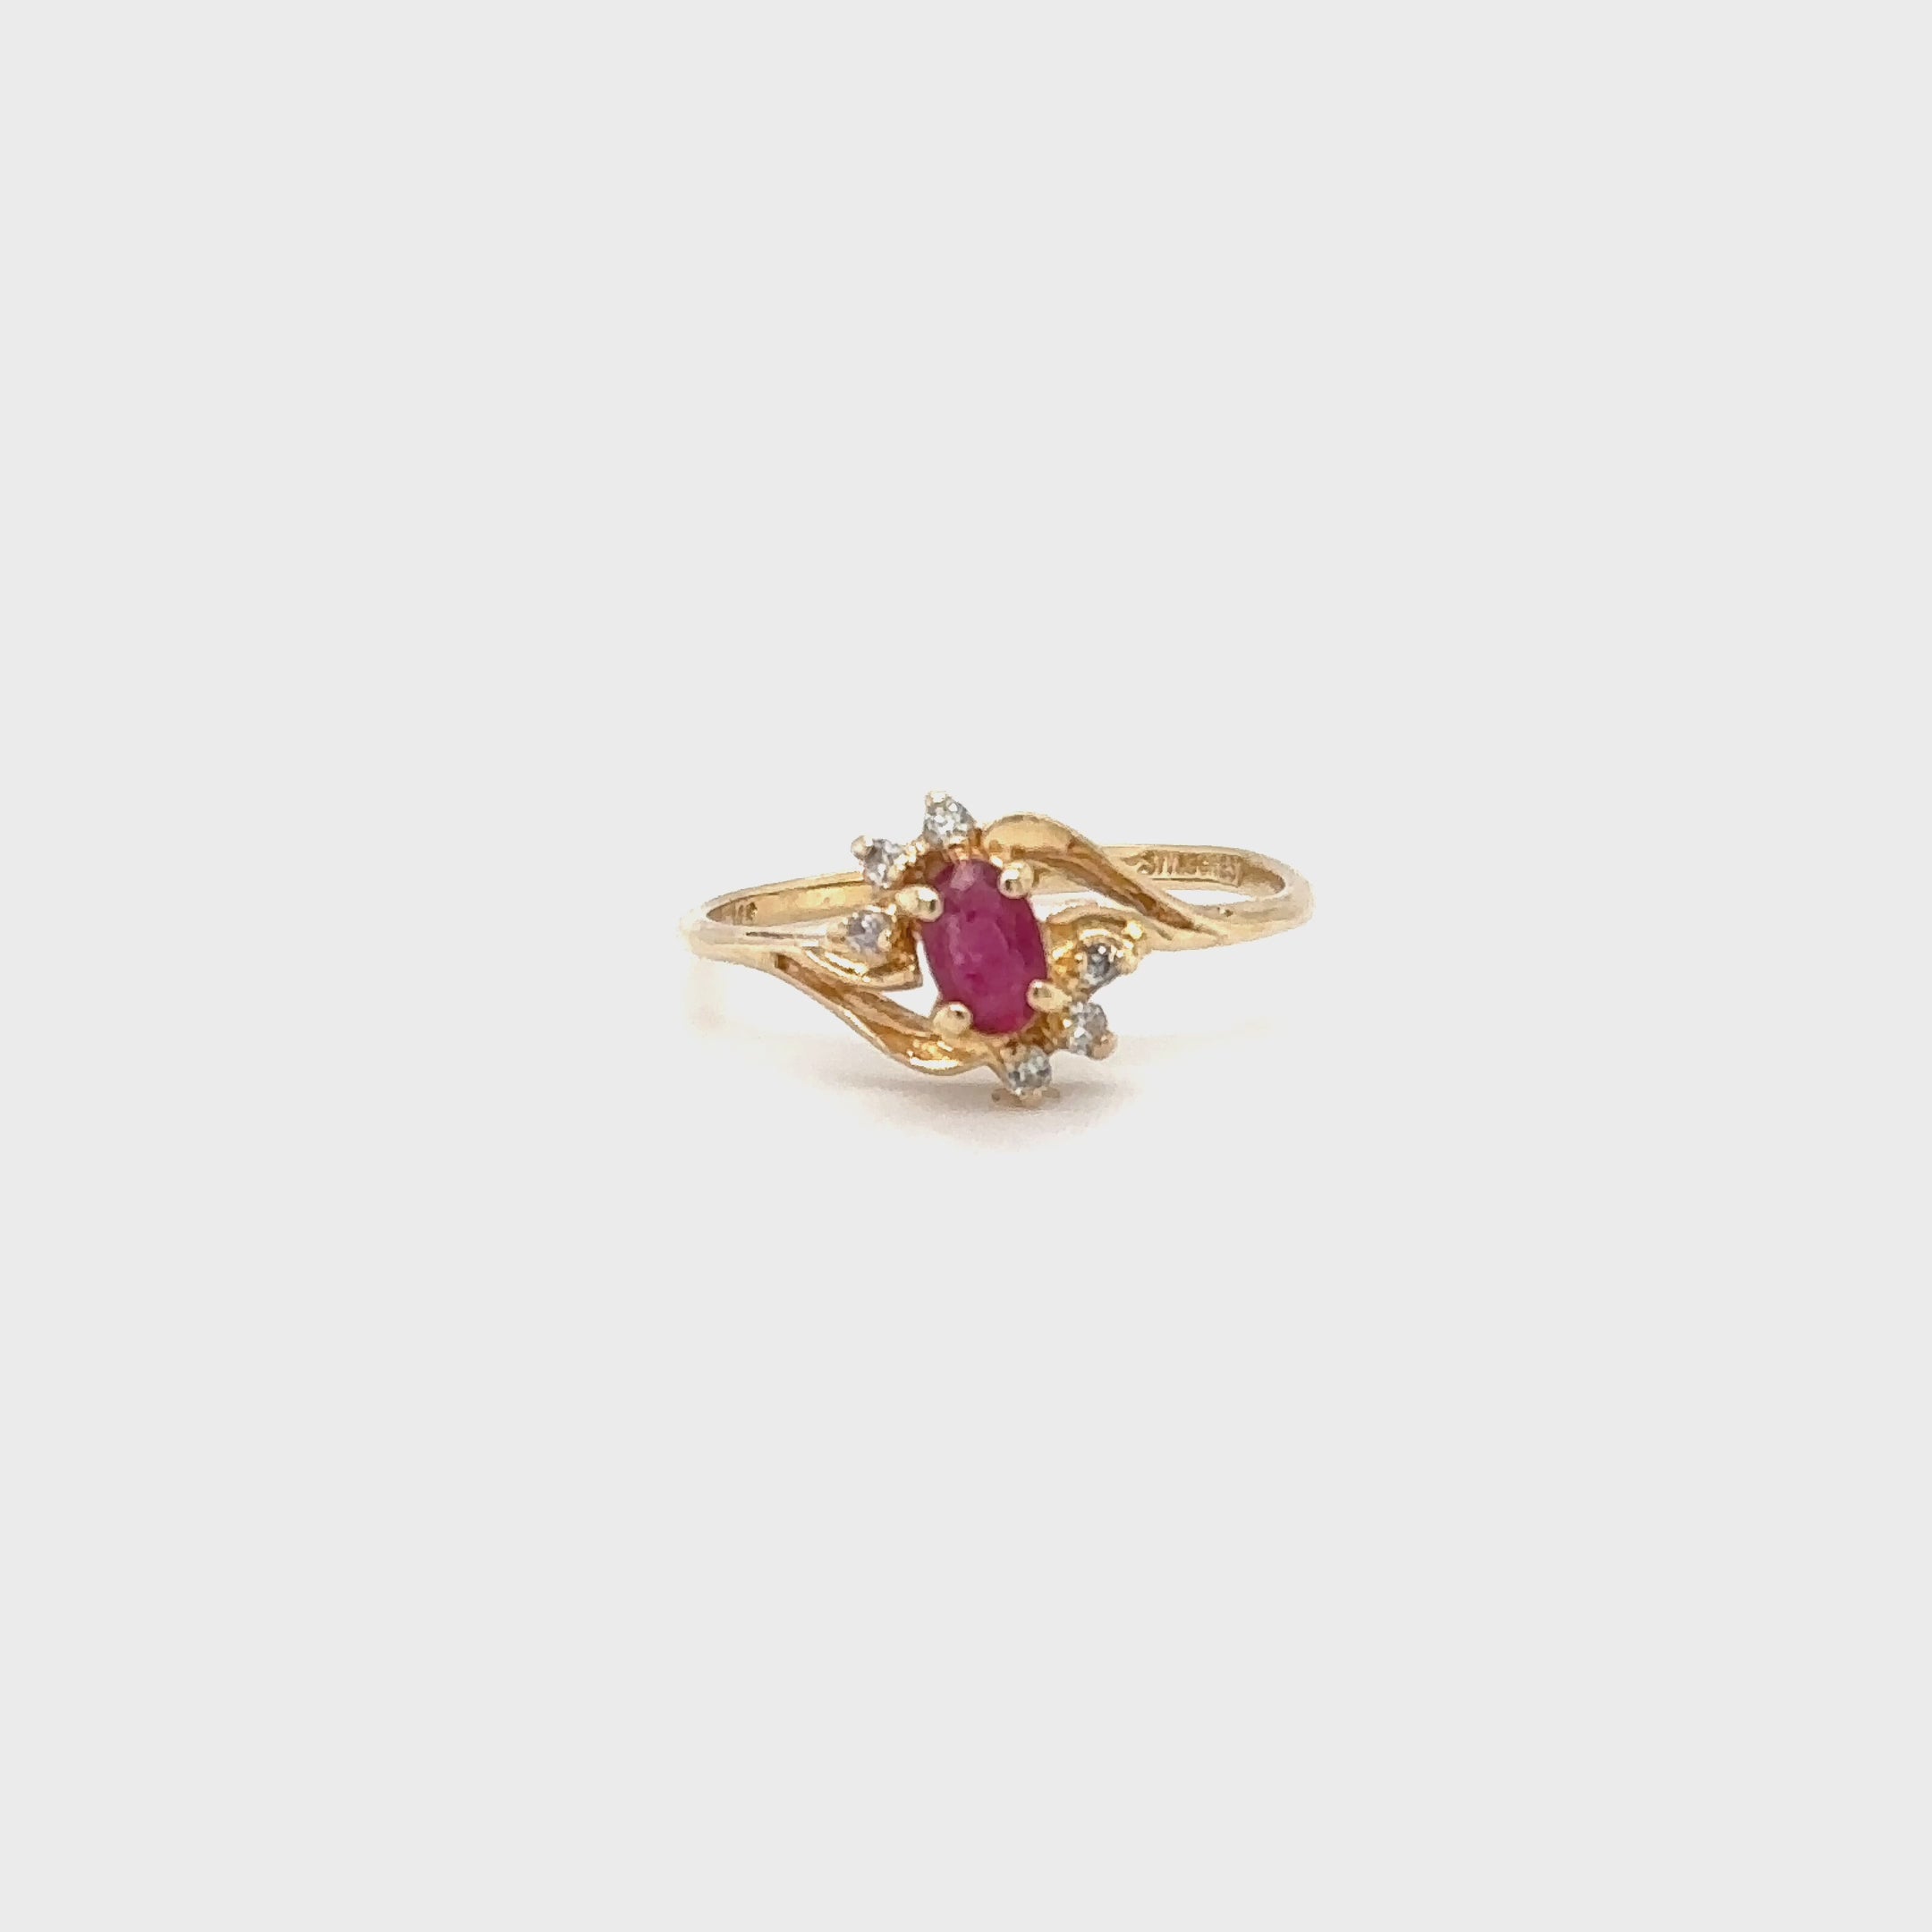 Natural Ruby & Diamond Ring 14K Solid Gold .29tcw Engagement Ring Ruby Gemstone Red Birthstone Jewellery Jewelry Fine Promise Bridal Vintage